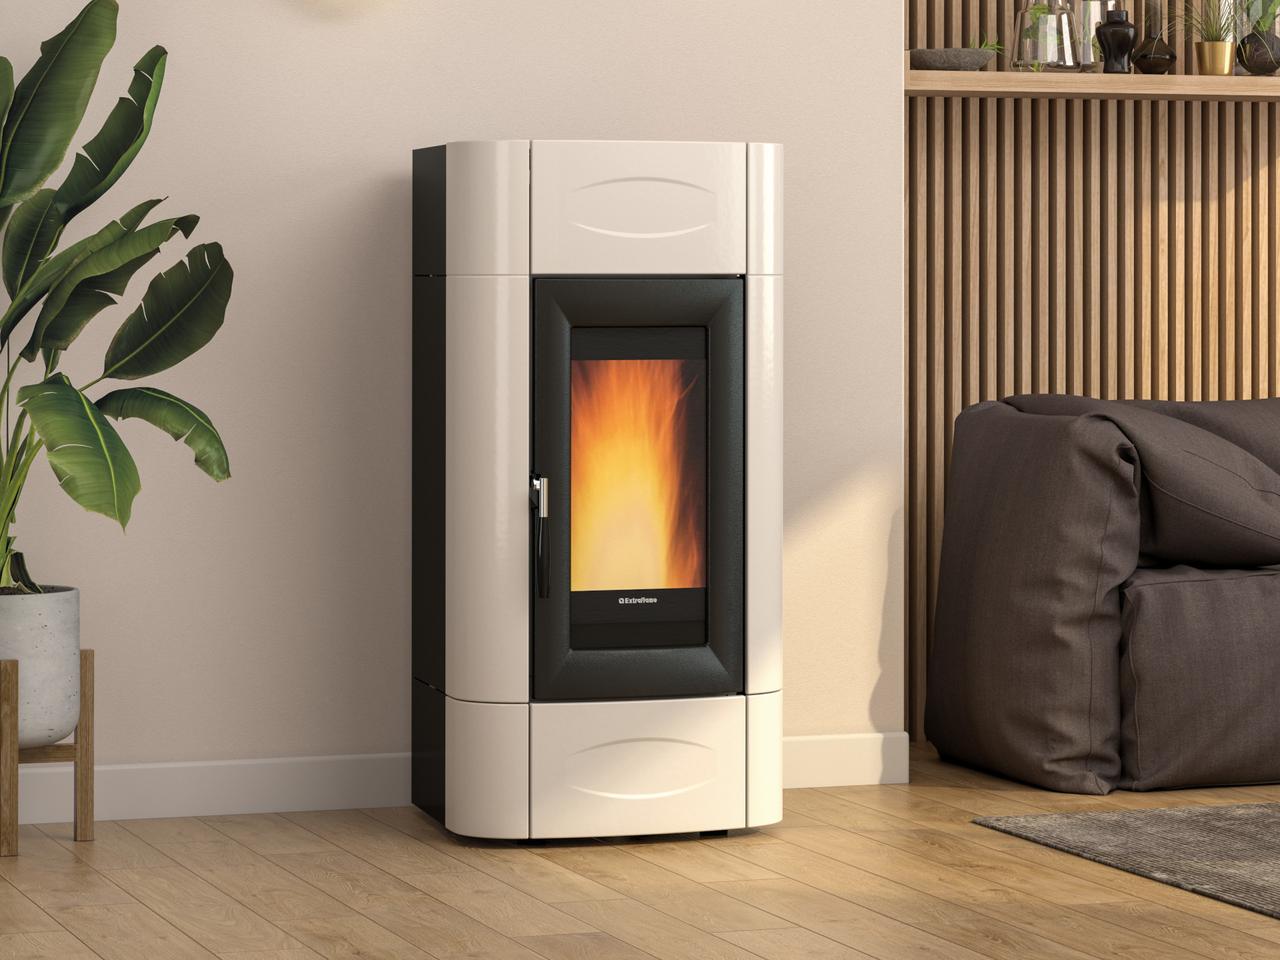 New pellet stoves from La Nordica Extraflame